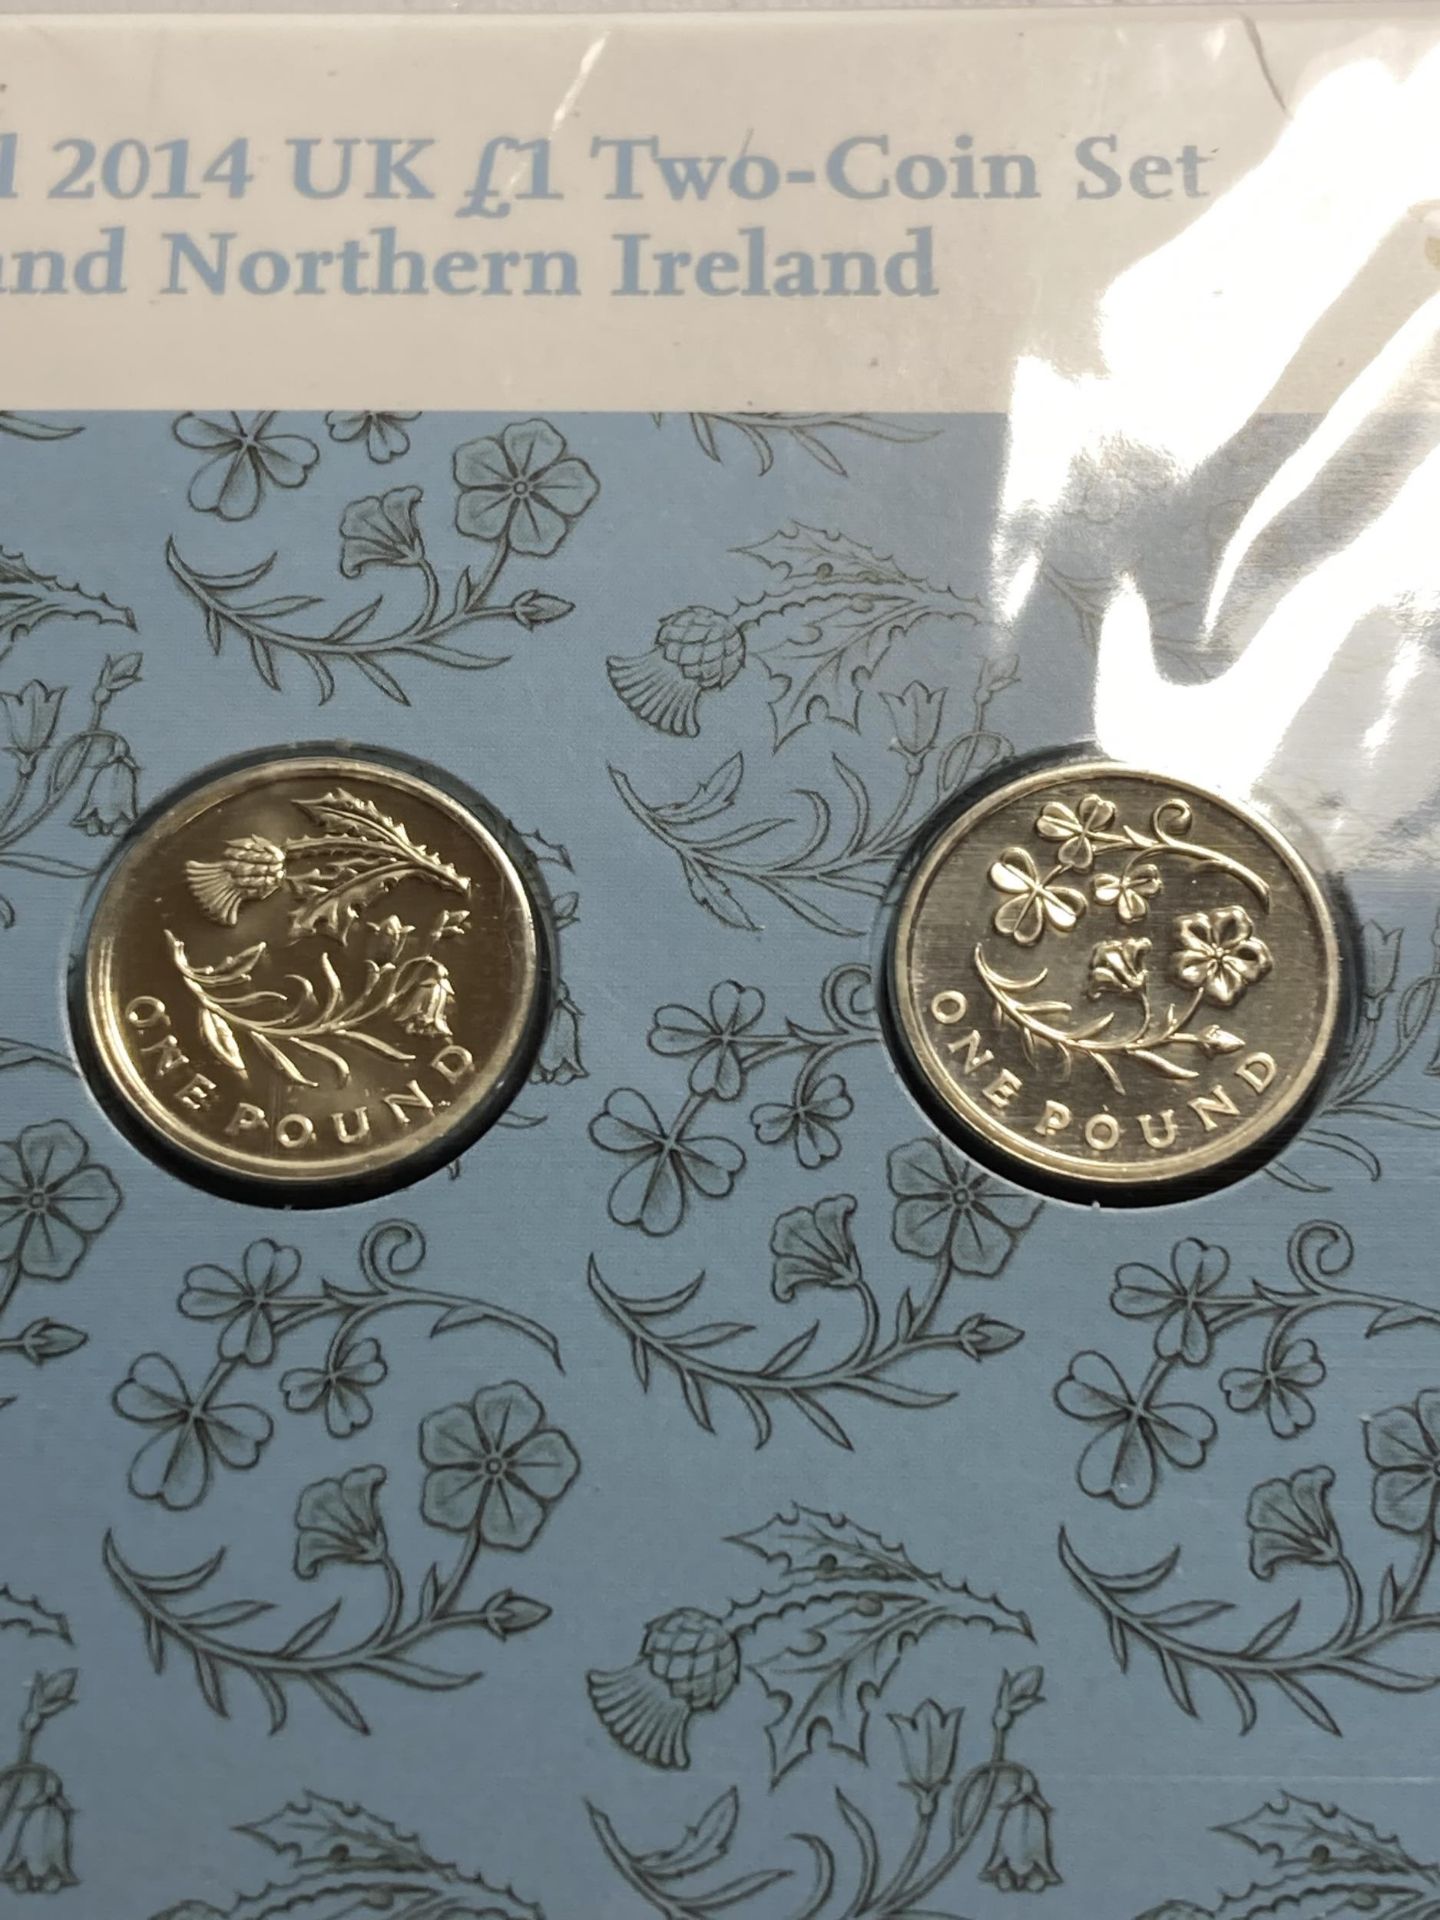 THE ROYAL MINT THE FLORAL 2014 UK £1 TWO COIN SETS SCOTLAND AND NORTHERN IRELAND - Image 2 of 2